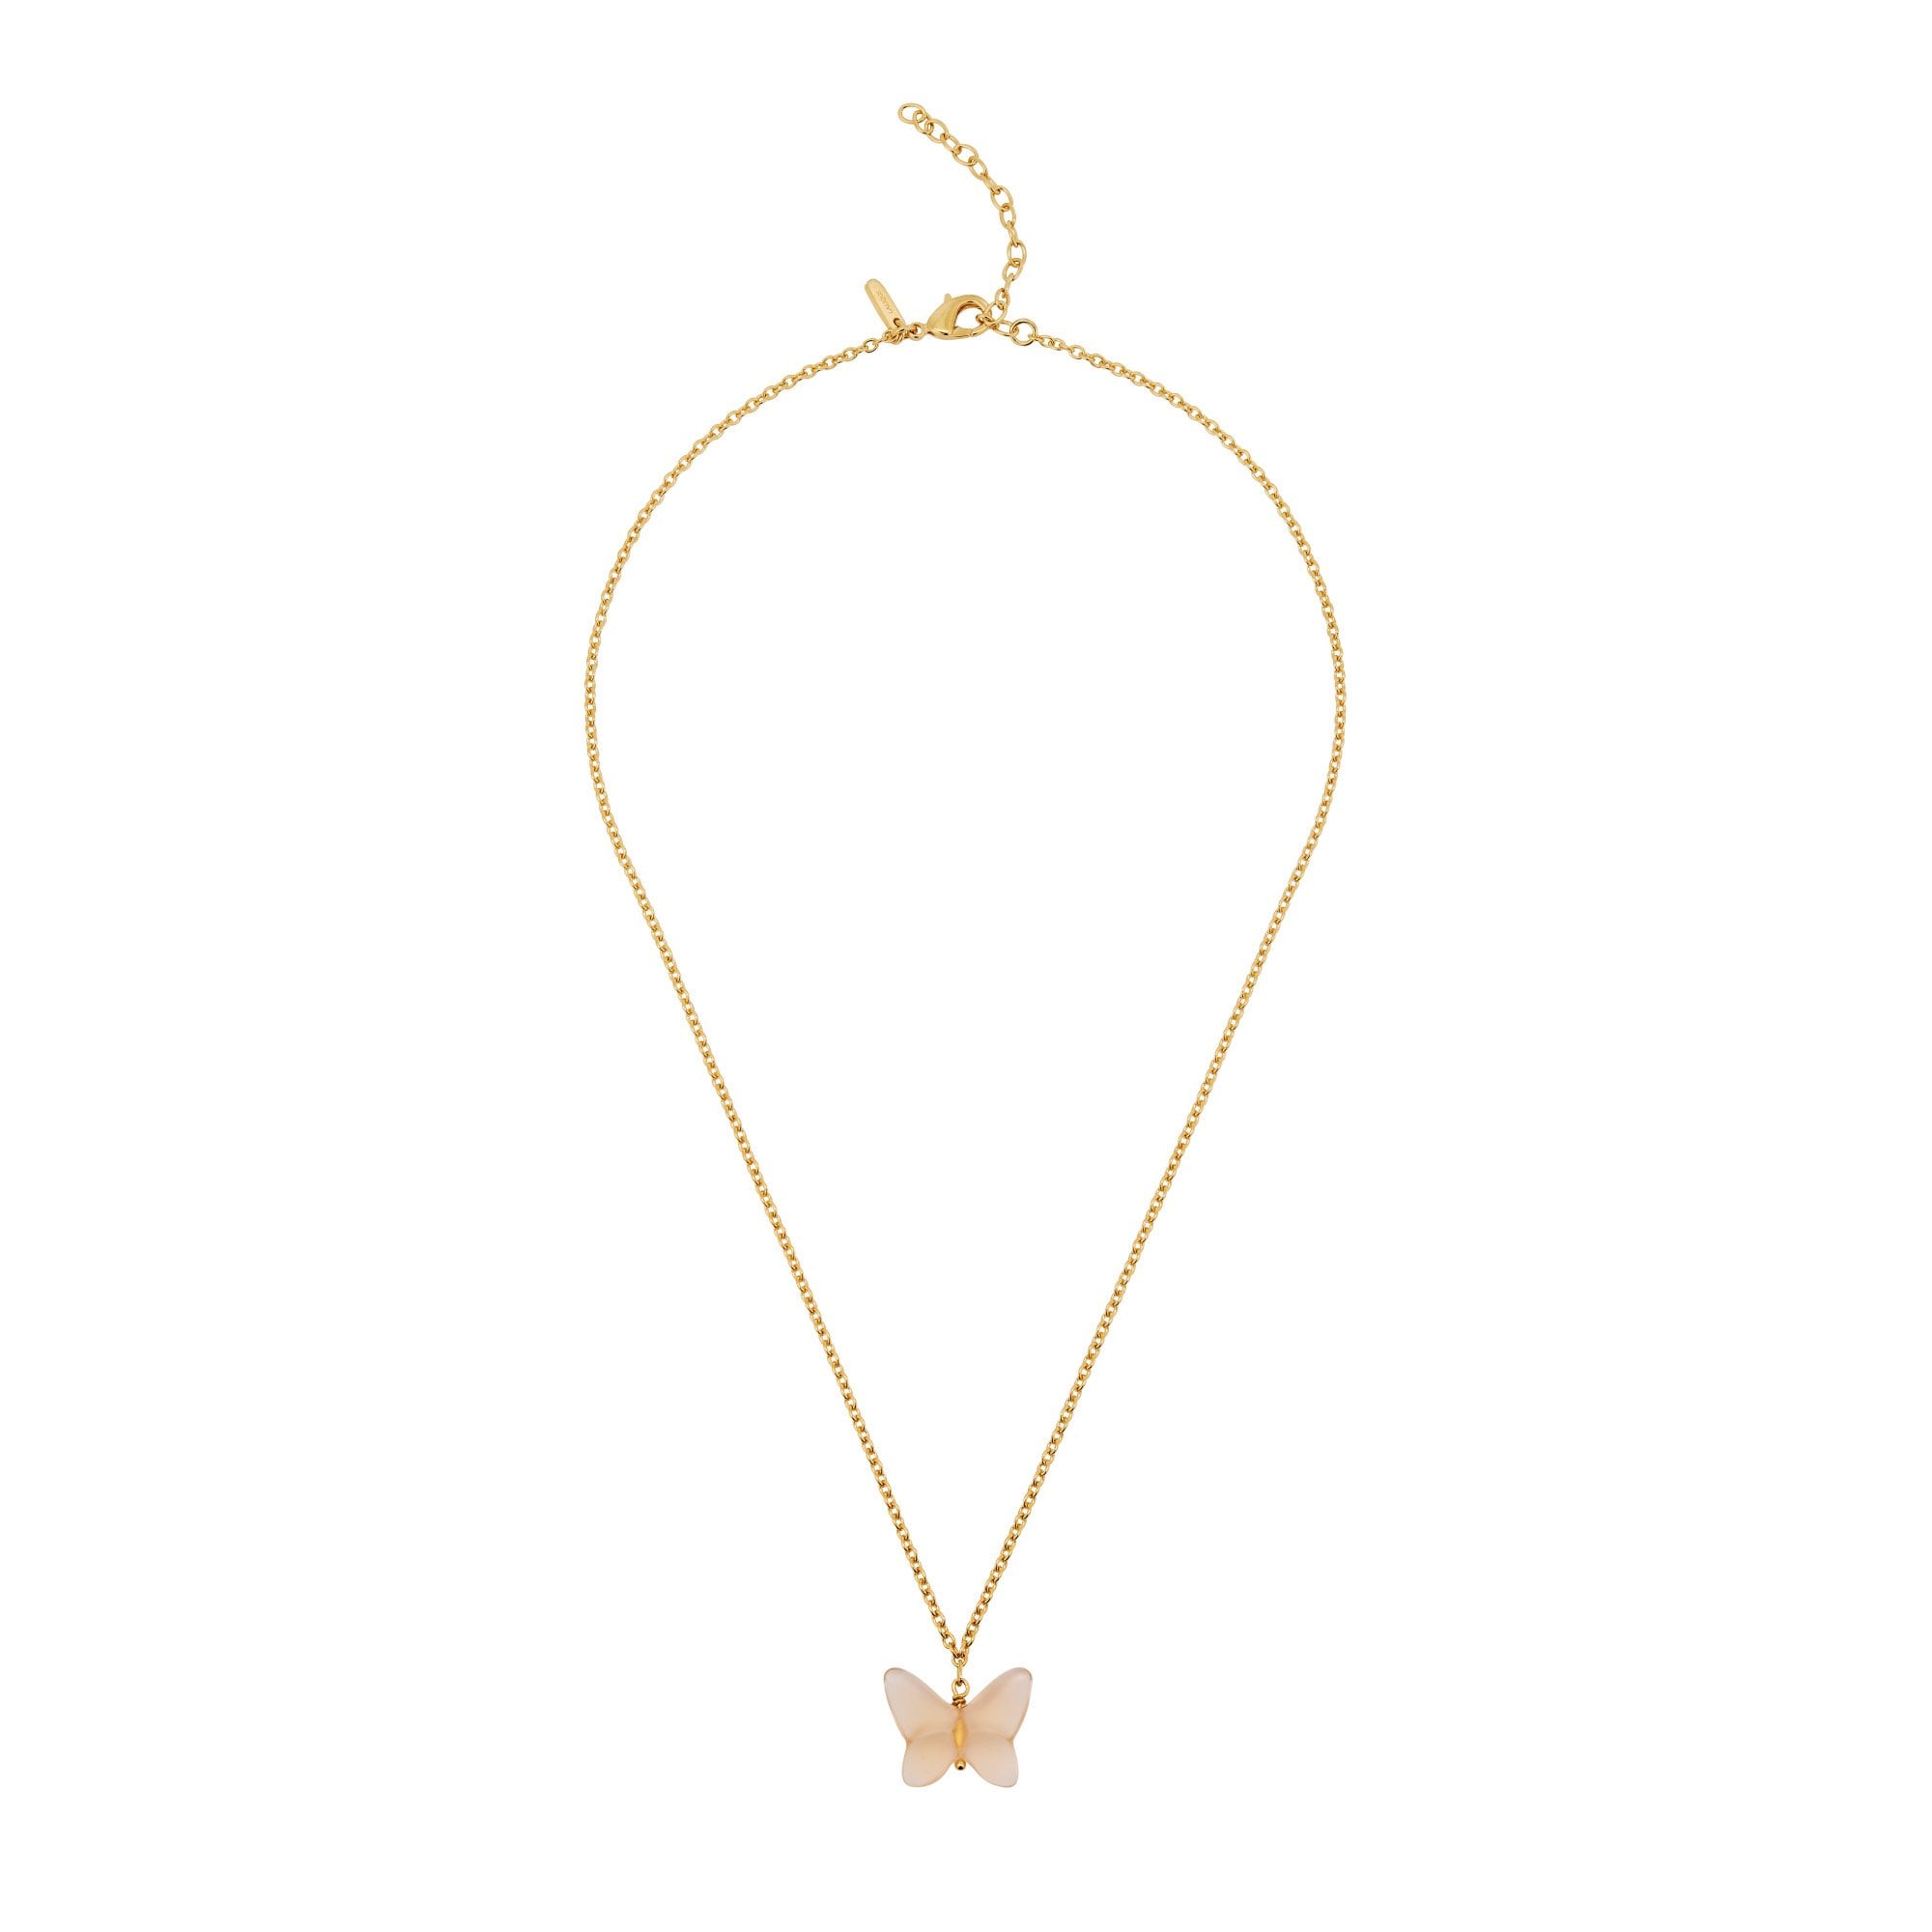 Papillon 18ct Yellow Gold-Plated & Peach Crystal Necklace